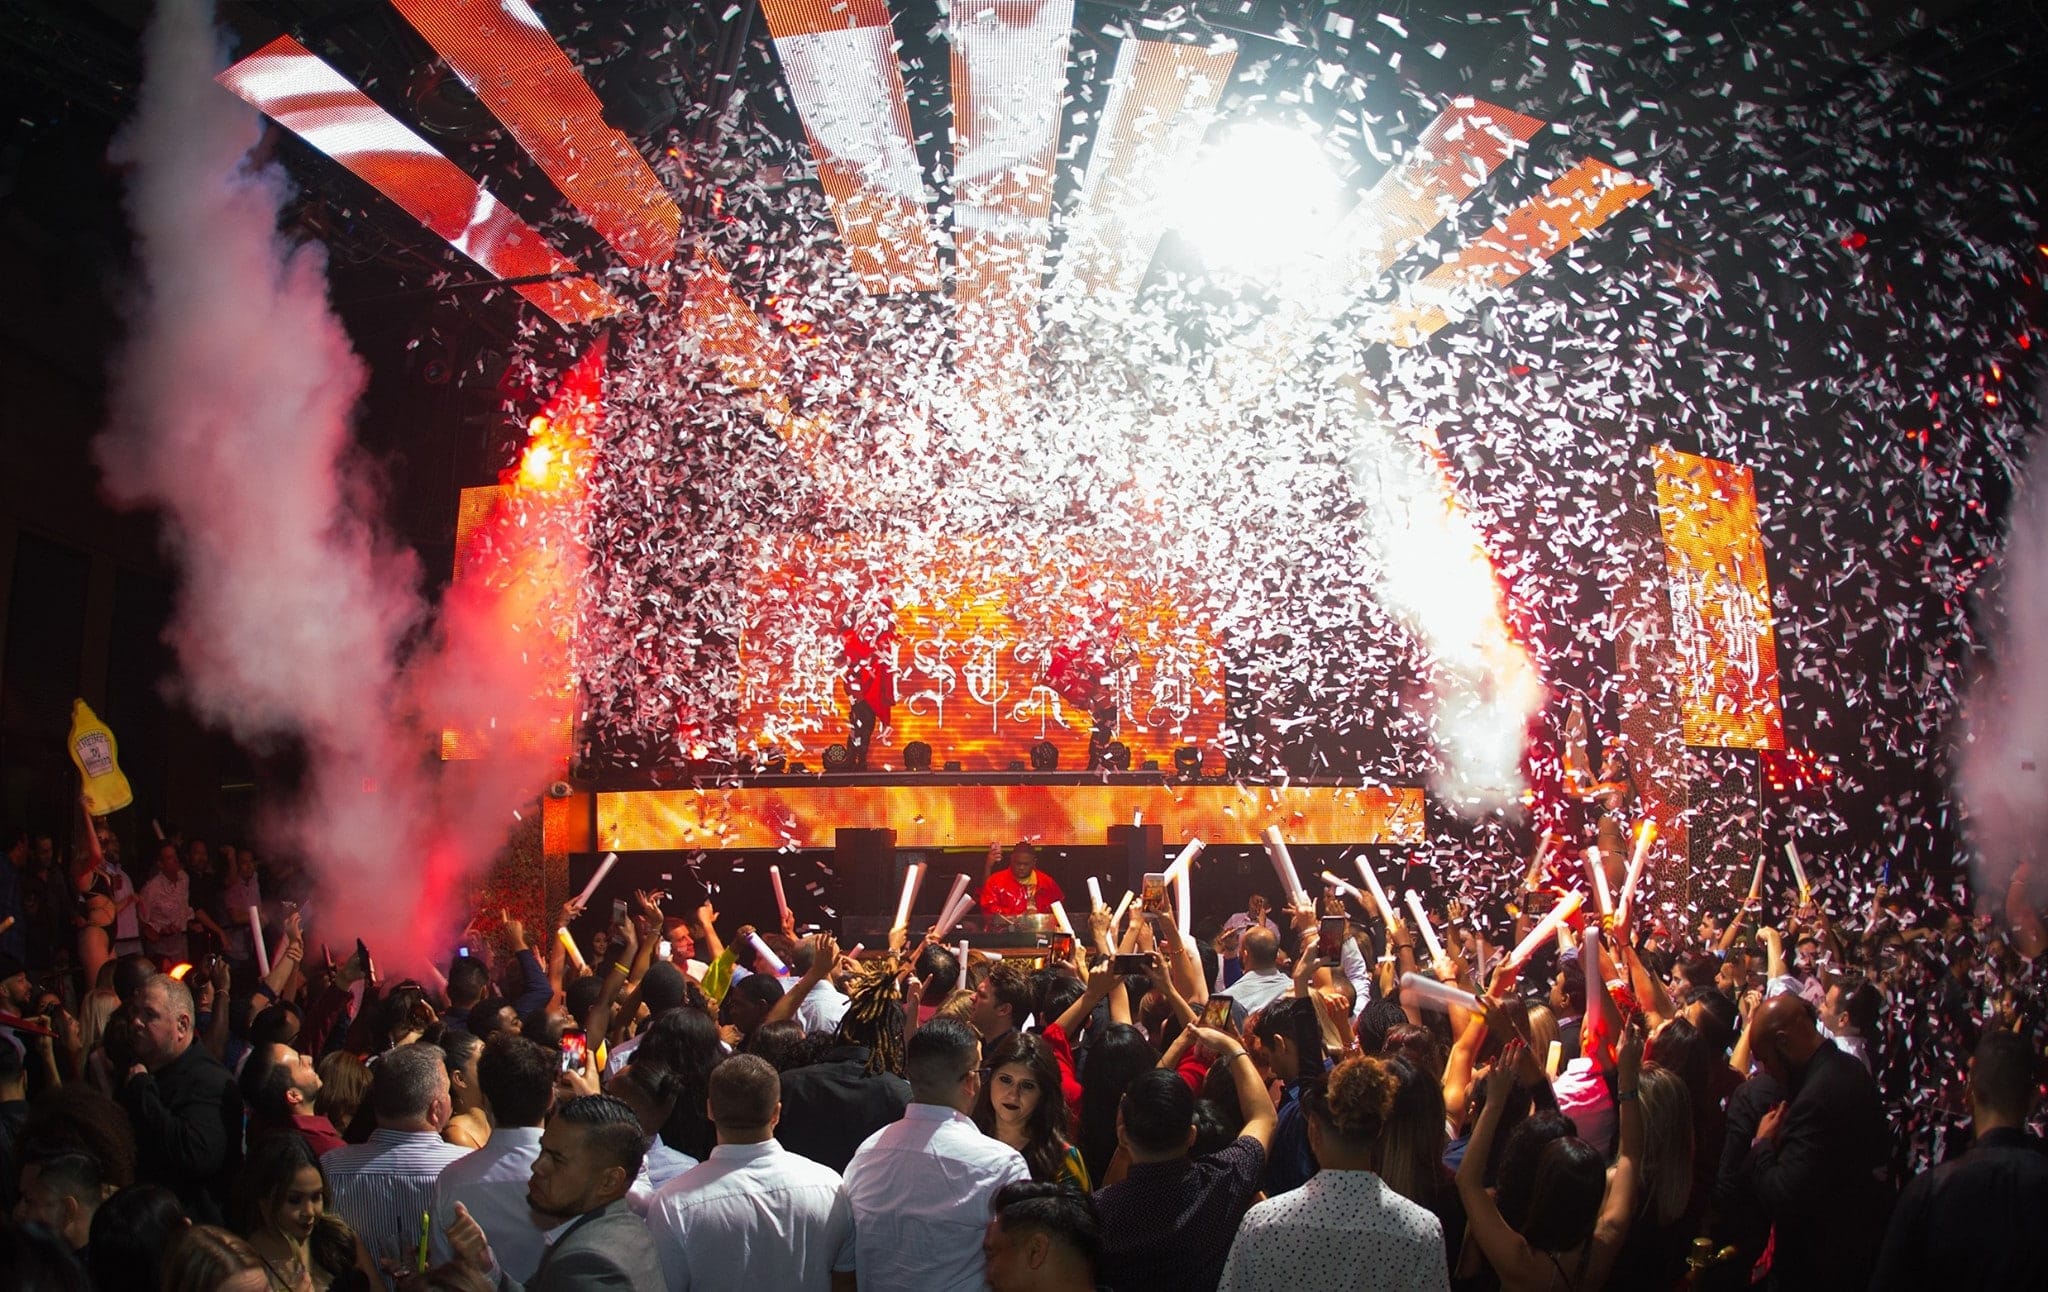 Best las vegas nightclubs for couples at tao